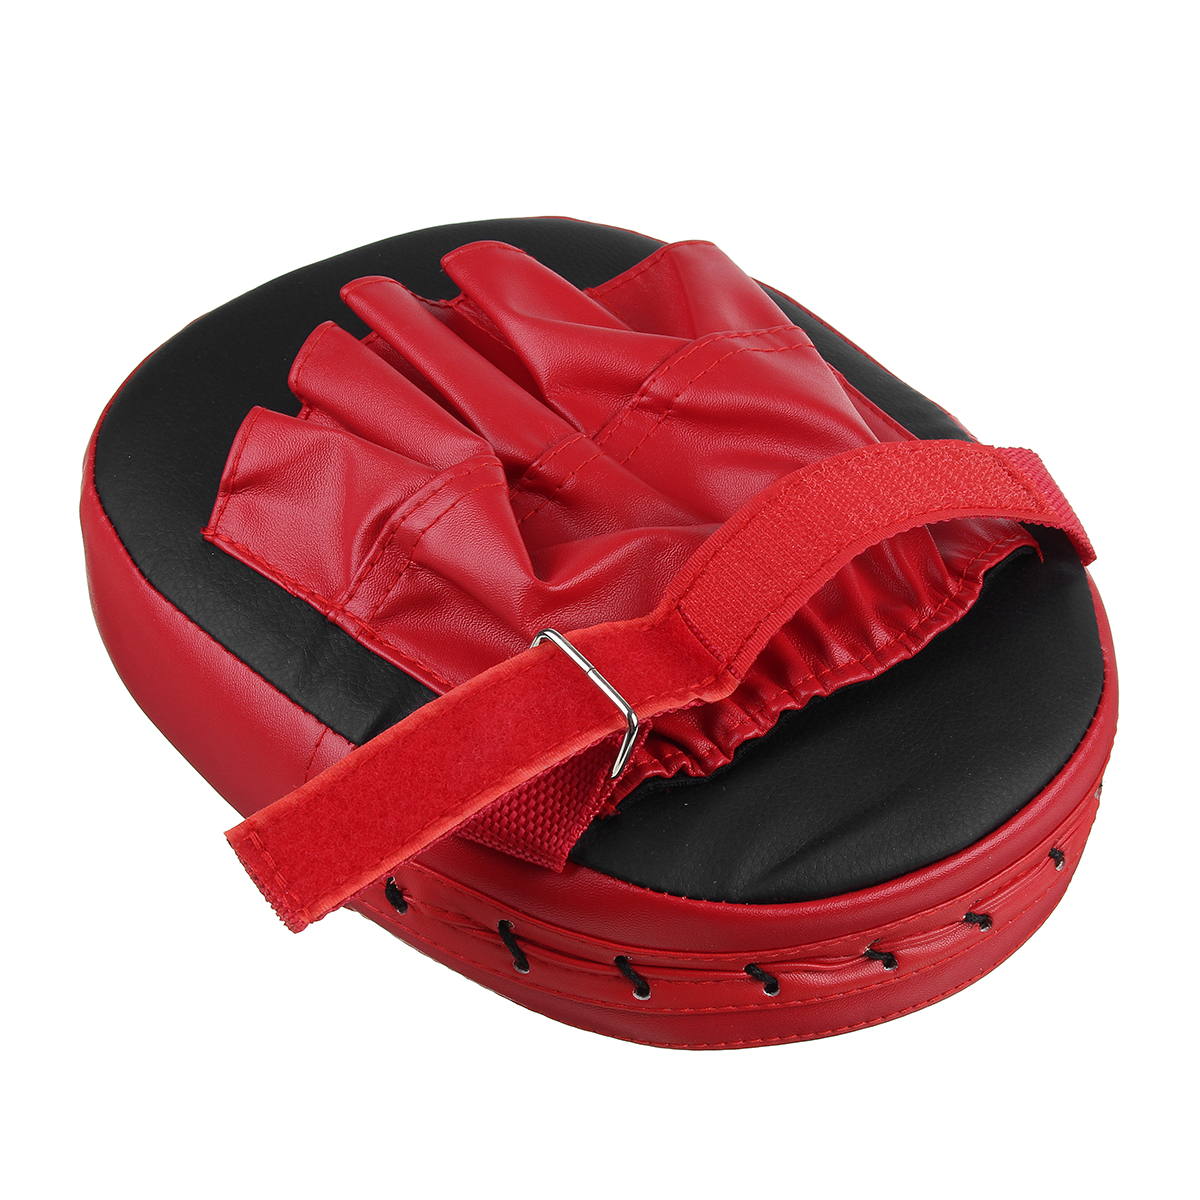 1-Pcs-Boxing-Pads-Curved-Hand-Target-Pads-MMA-Karate-Thai-Martial-Arts-Punching-Pads-Outdoor-Sport-K-1734539-5